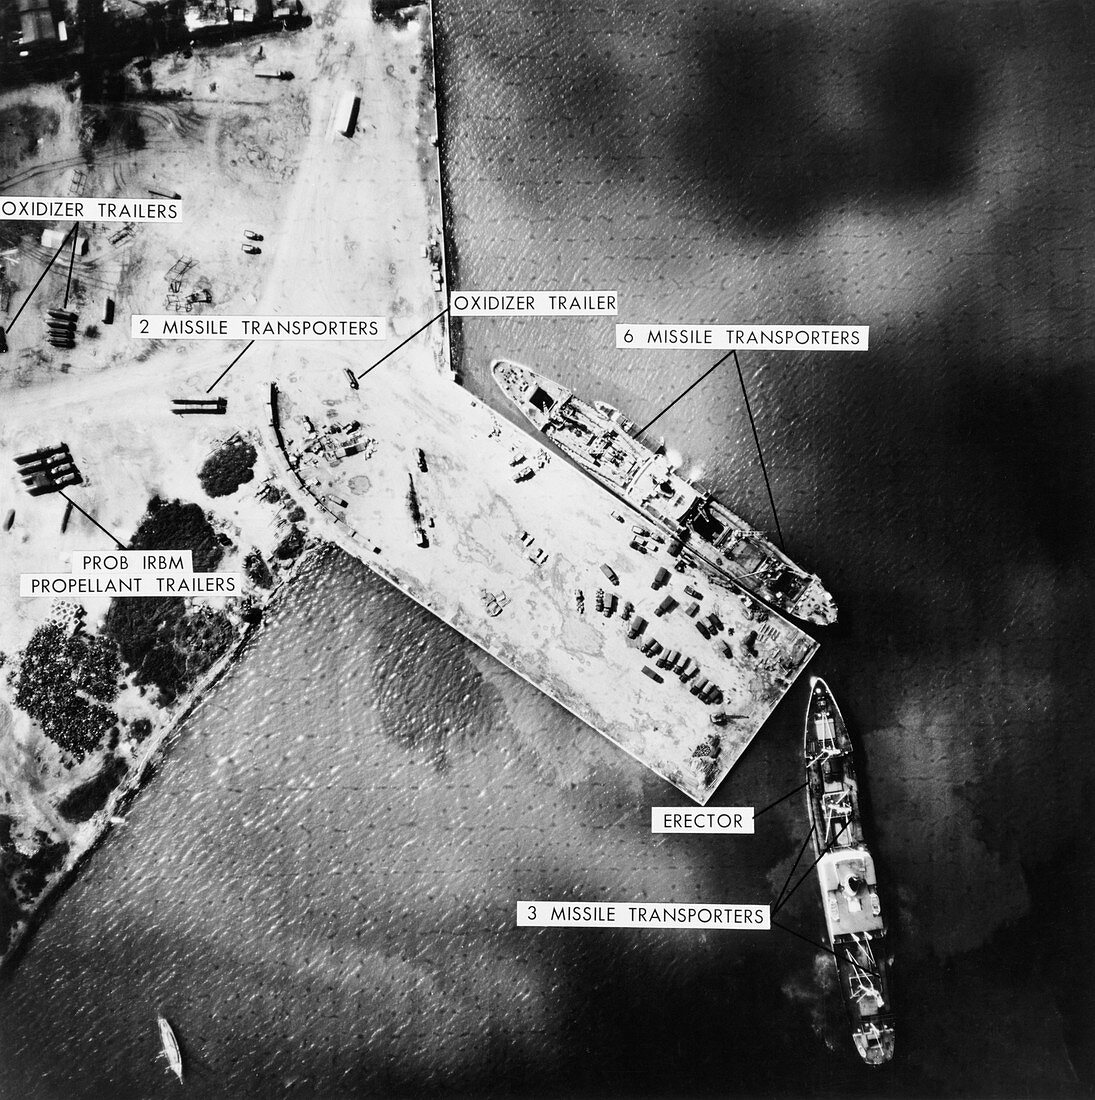 Cuban Missile Crisis site being dismantled, 1962